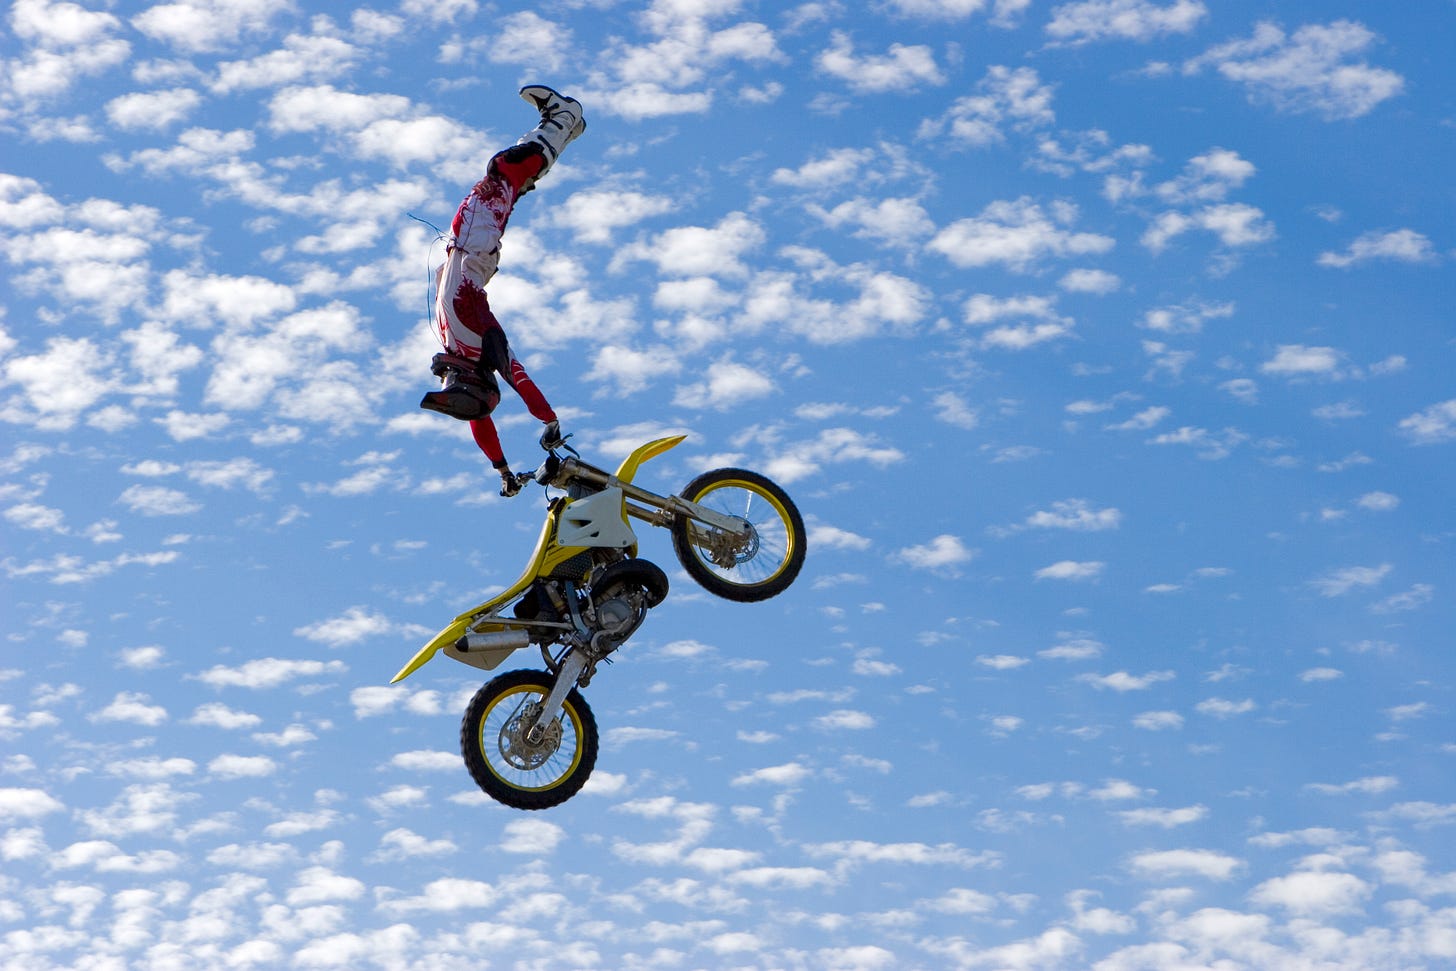 Motocross aerialist completely upside down holding the handlebars of a bike in a blue but cloudy filled sky, the bike wheels down